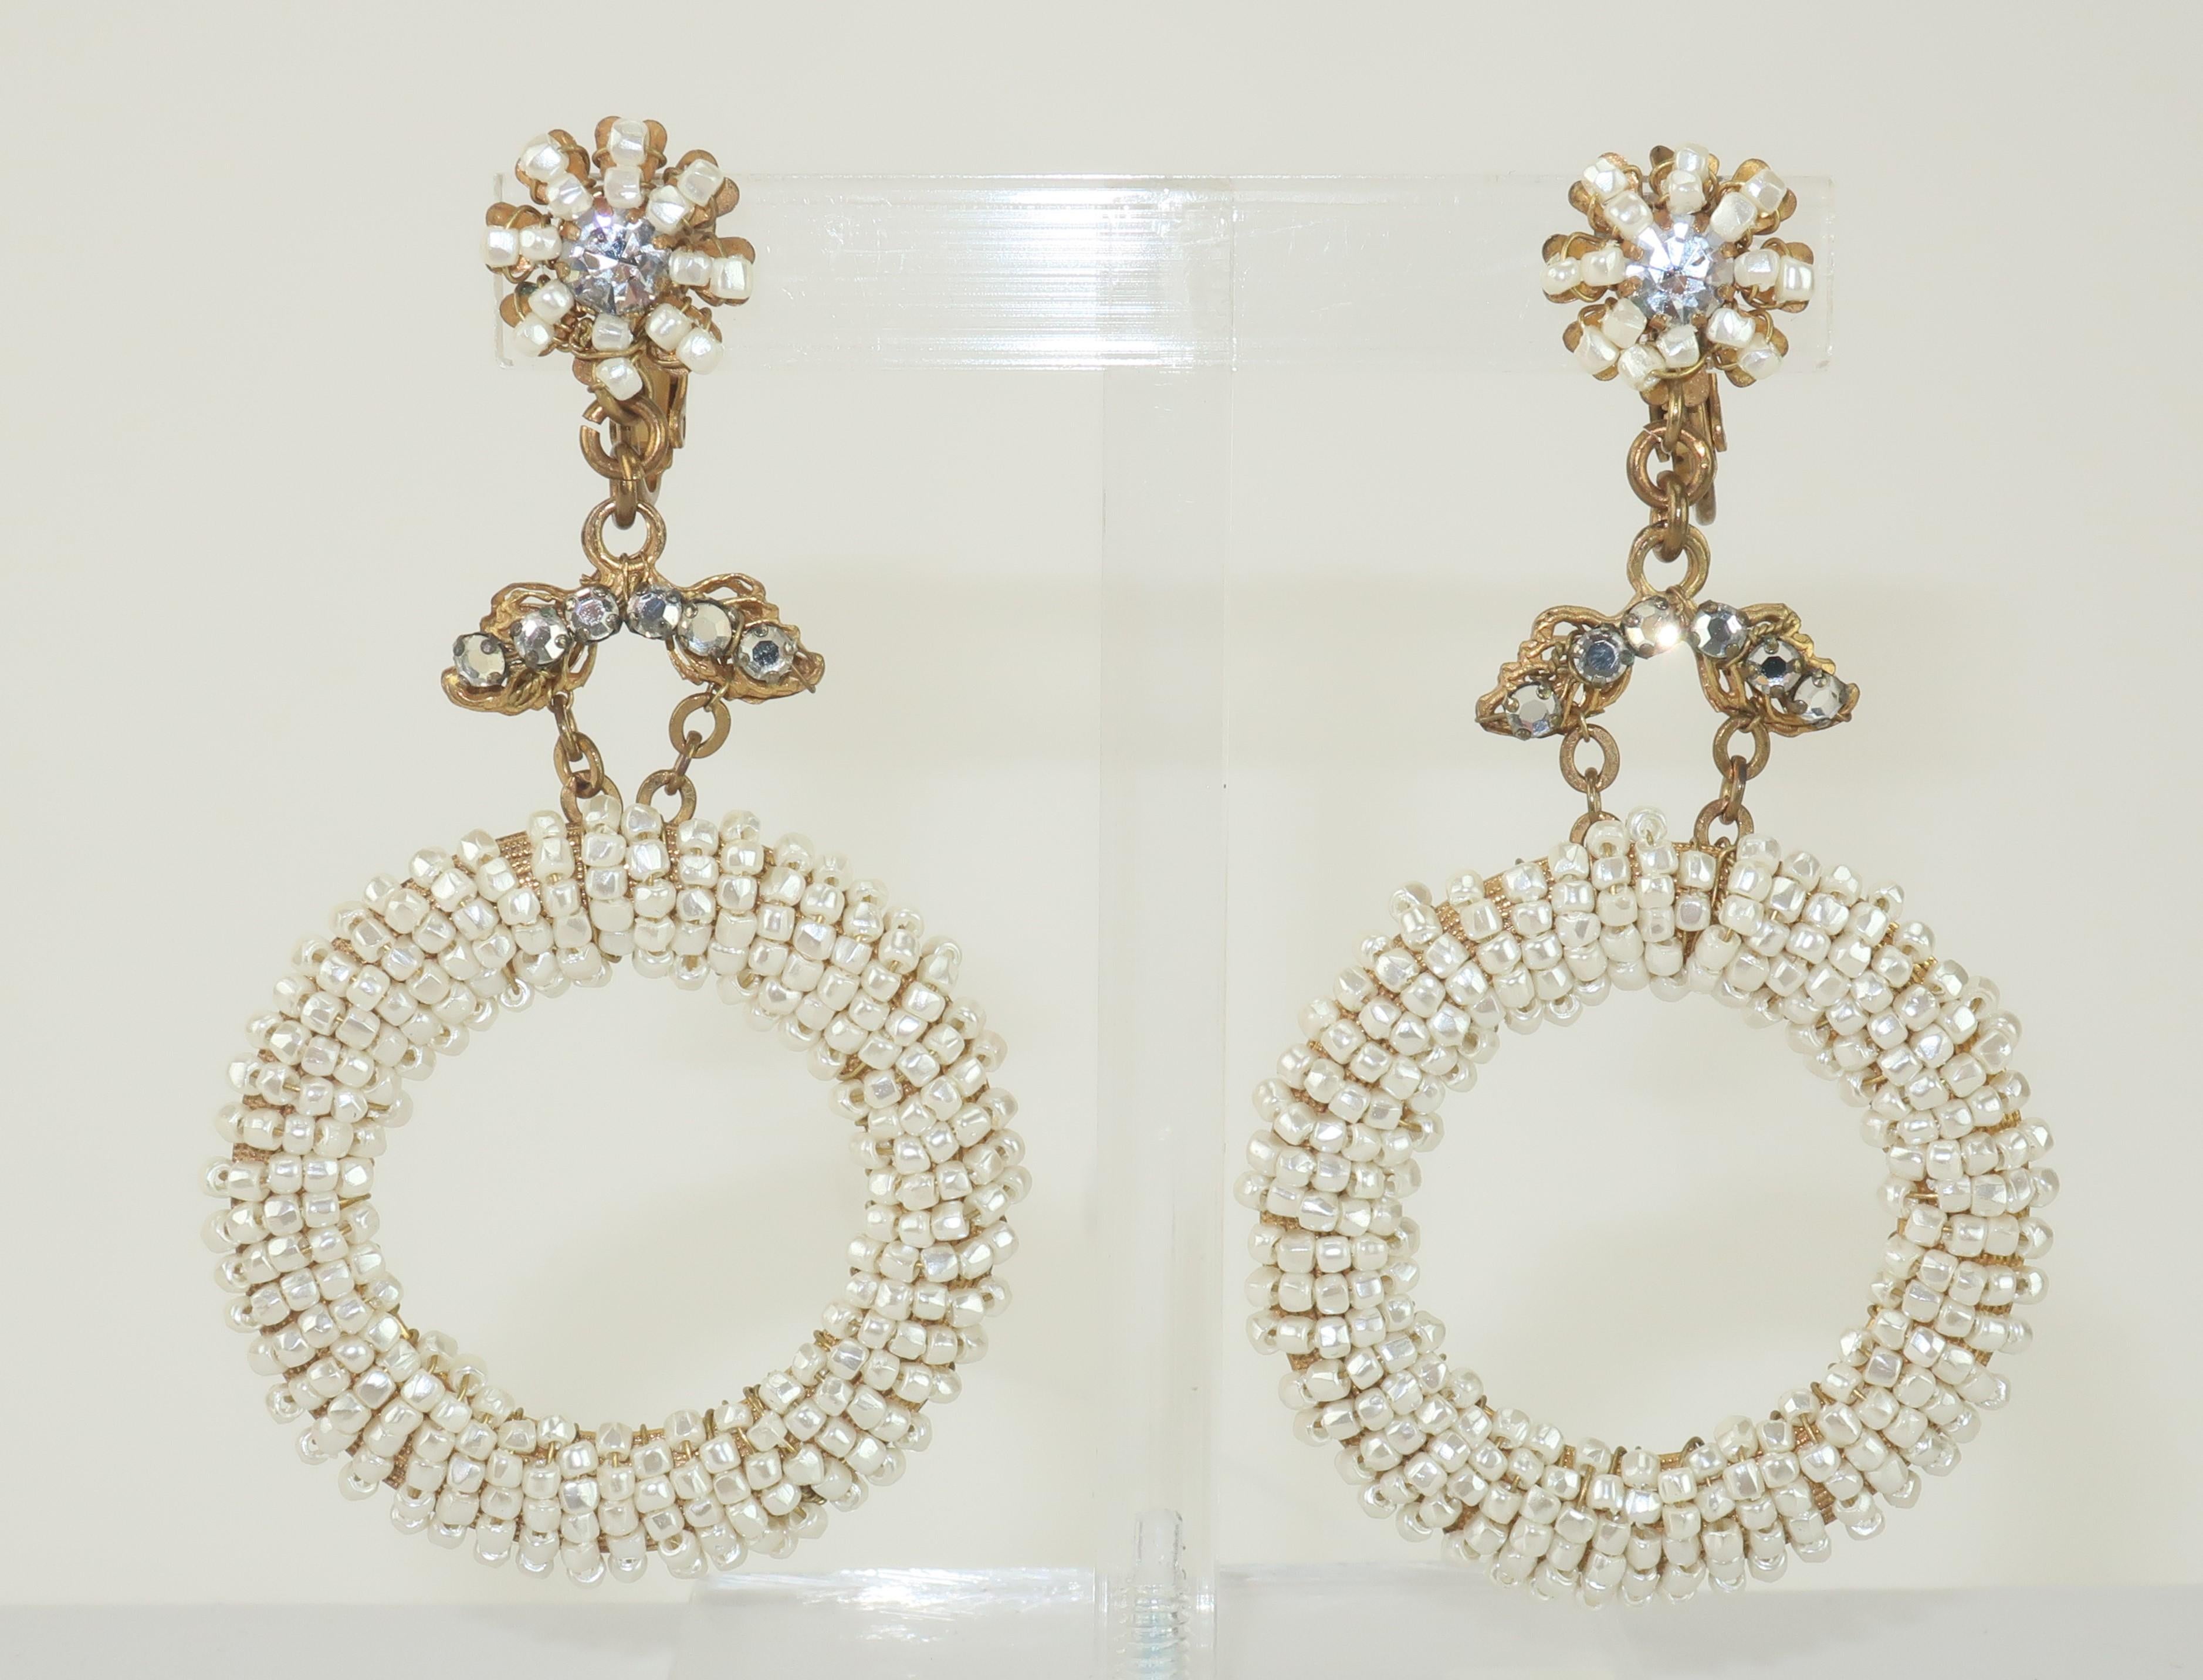 C.1960 Miriam Haskell hoop earrings with j-ring clip on hardware.  These ethereal earrings are a lovely combination of Haskell's traditional baroque aesthetic in a more youthful silhouette.  The tiny seed pearls are wired to a gilt gold base and